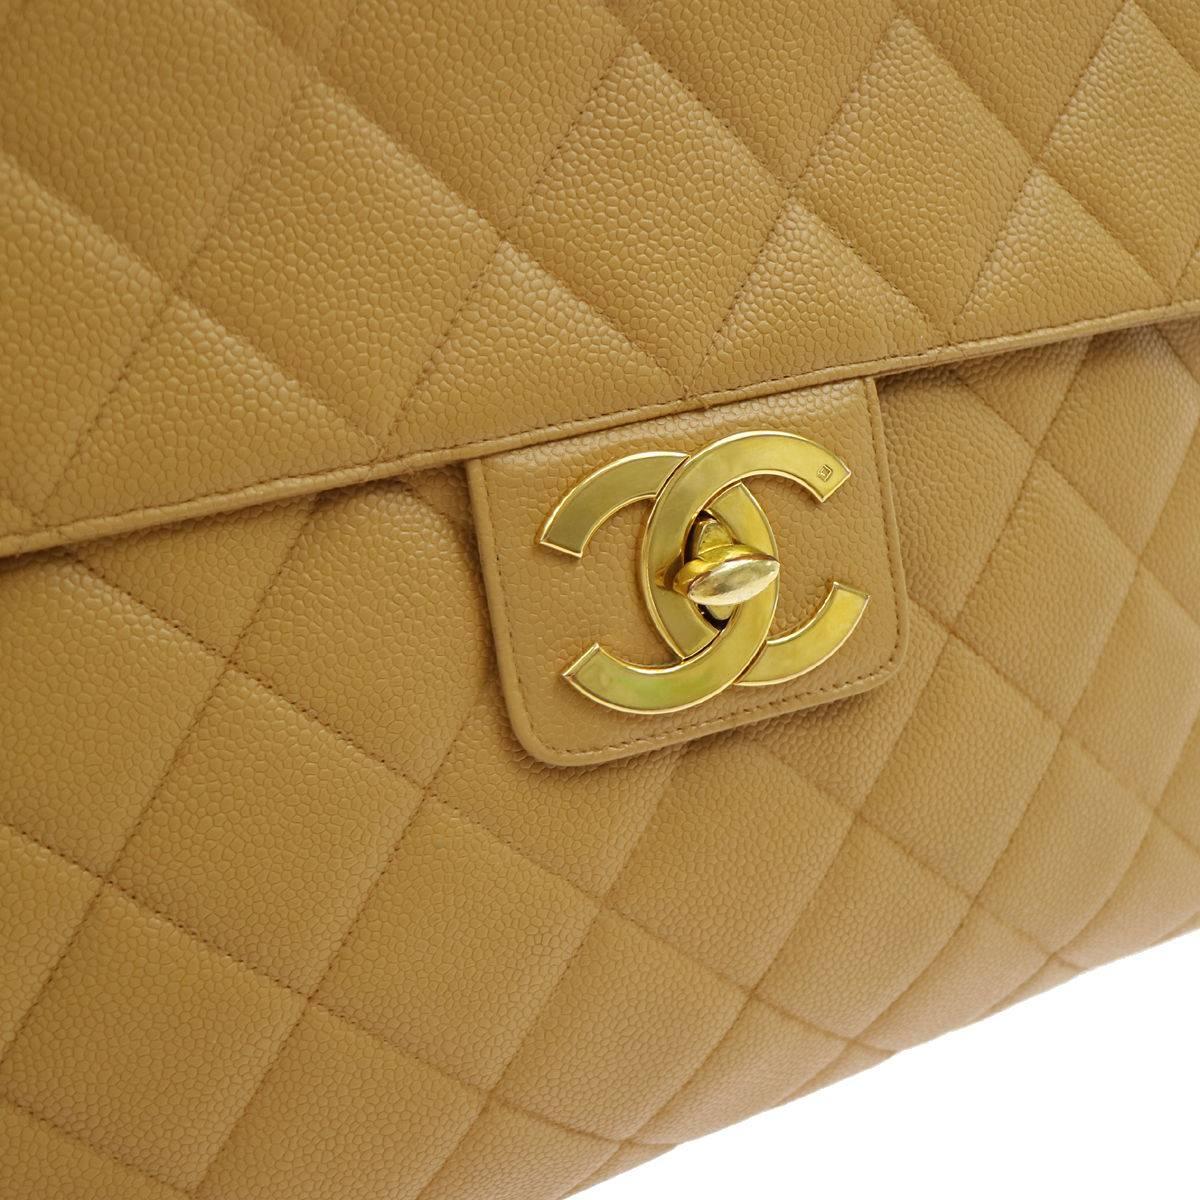 Chanel Nude Tan Caviar Leather Quilted Men's Women's Briefcase Top Handle Bag 

Caviar
Gold tone hardware
Turnlock closure
Leather lining
Made in France
Date code 2723255
Handle drop 3